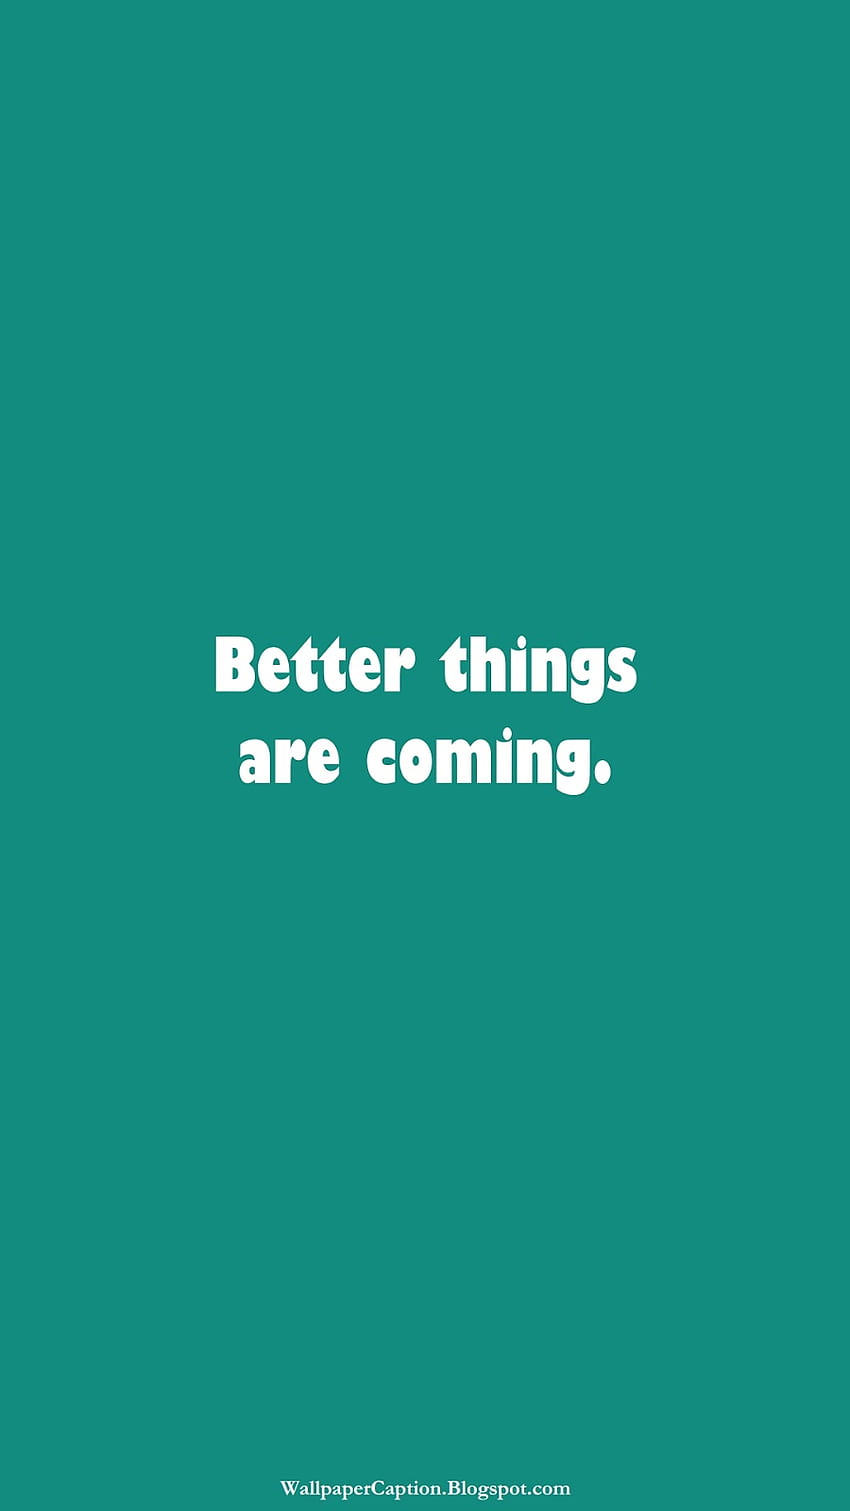 Phone with Short Quotes (Part 13.6 Teal Green WhatsApp) - Caption, Good Things Are Coming wallpaper ponsel HD